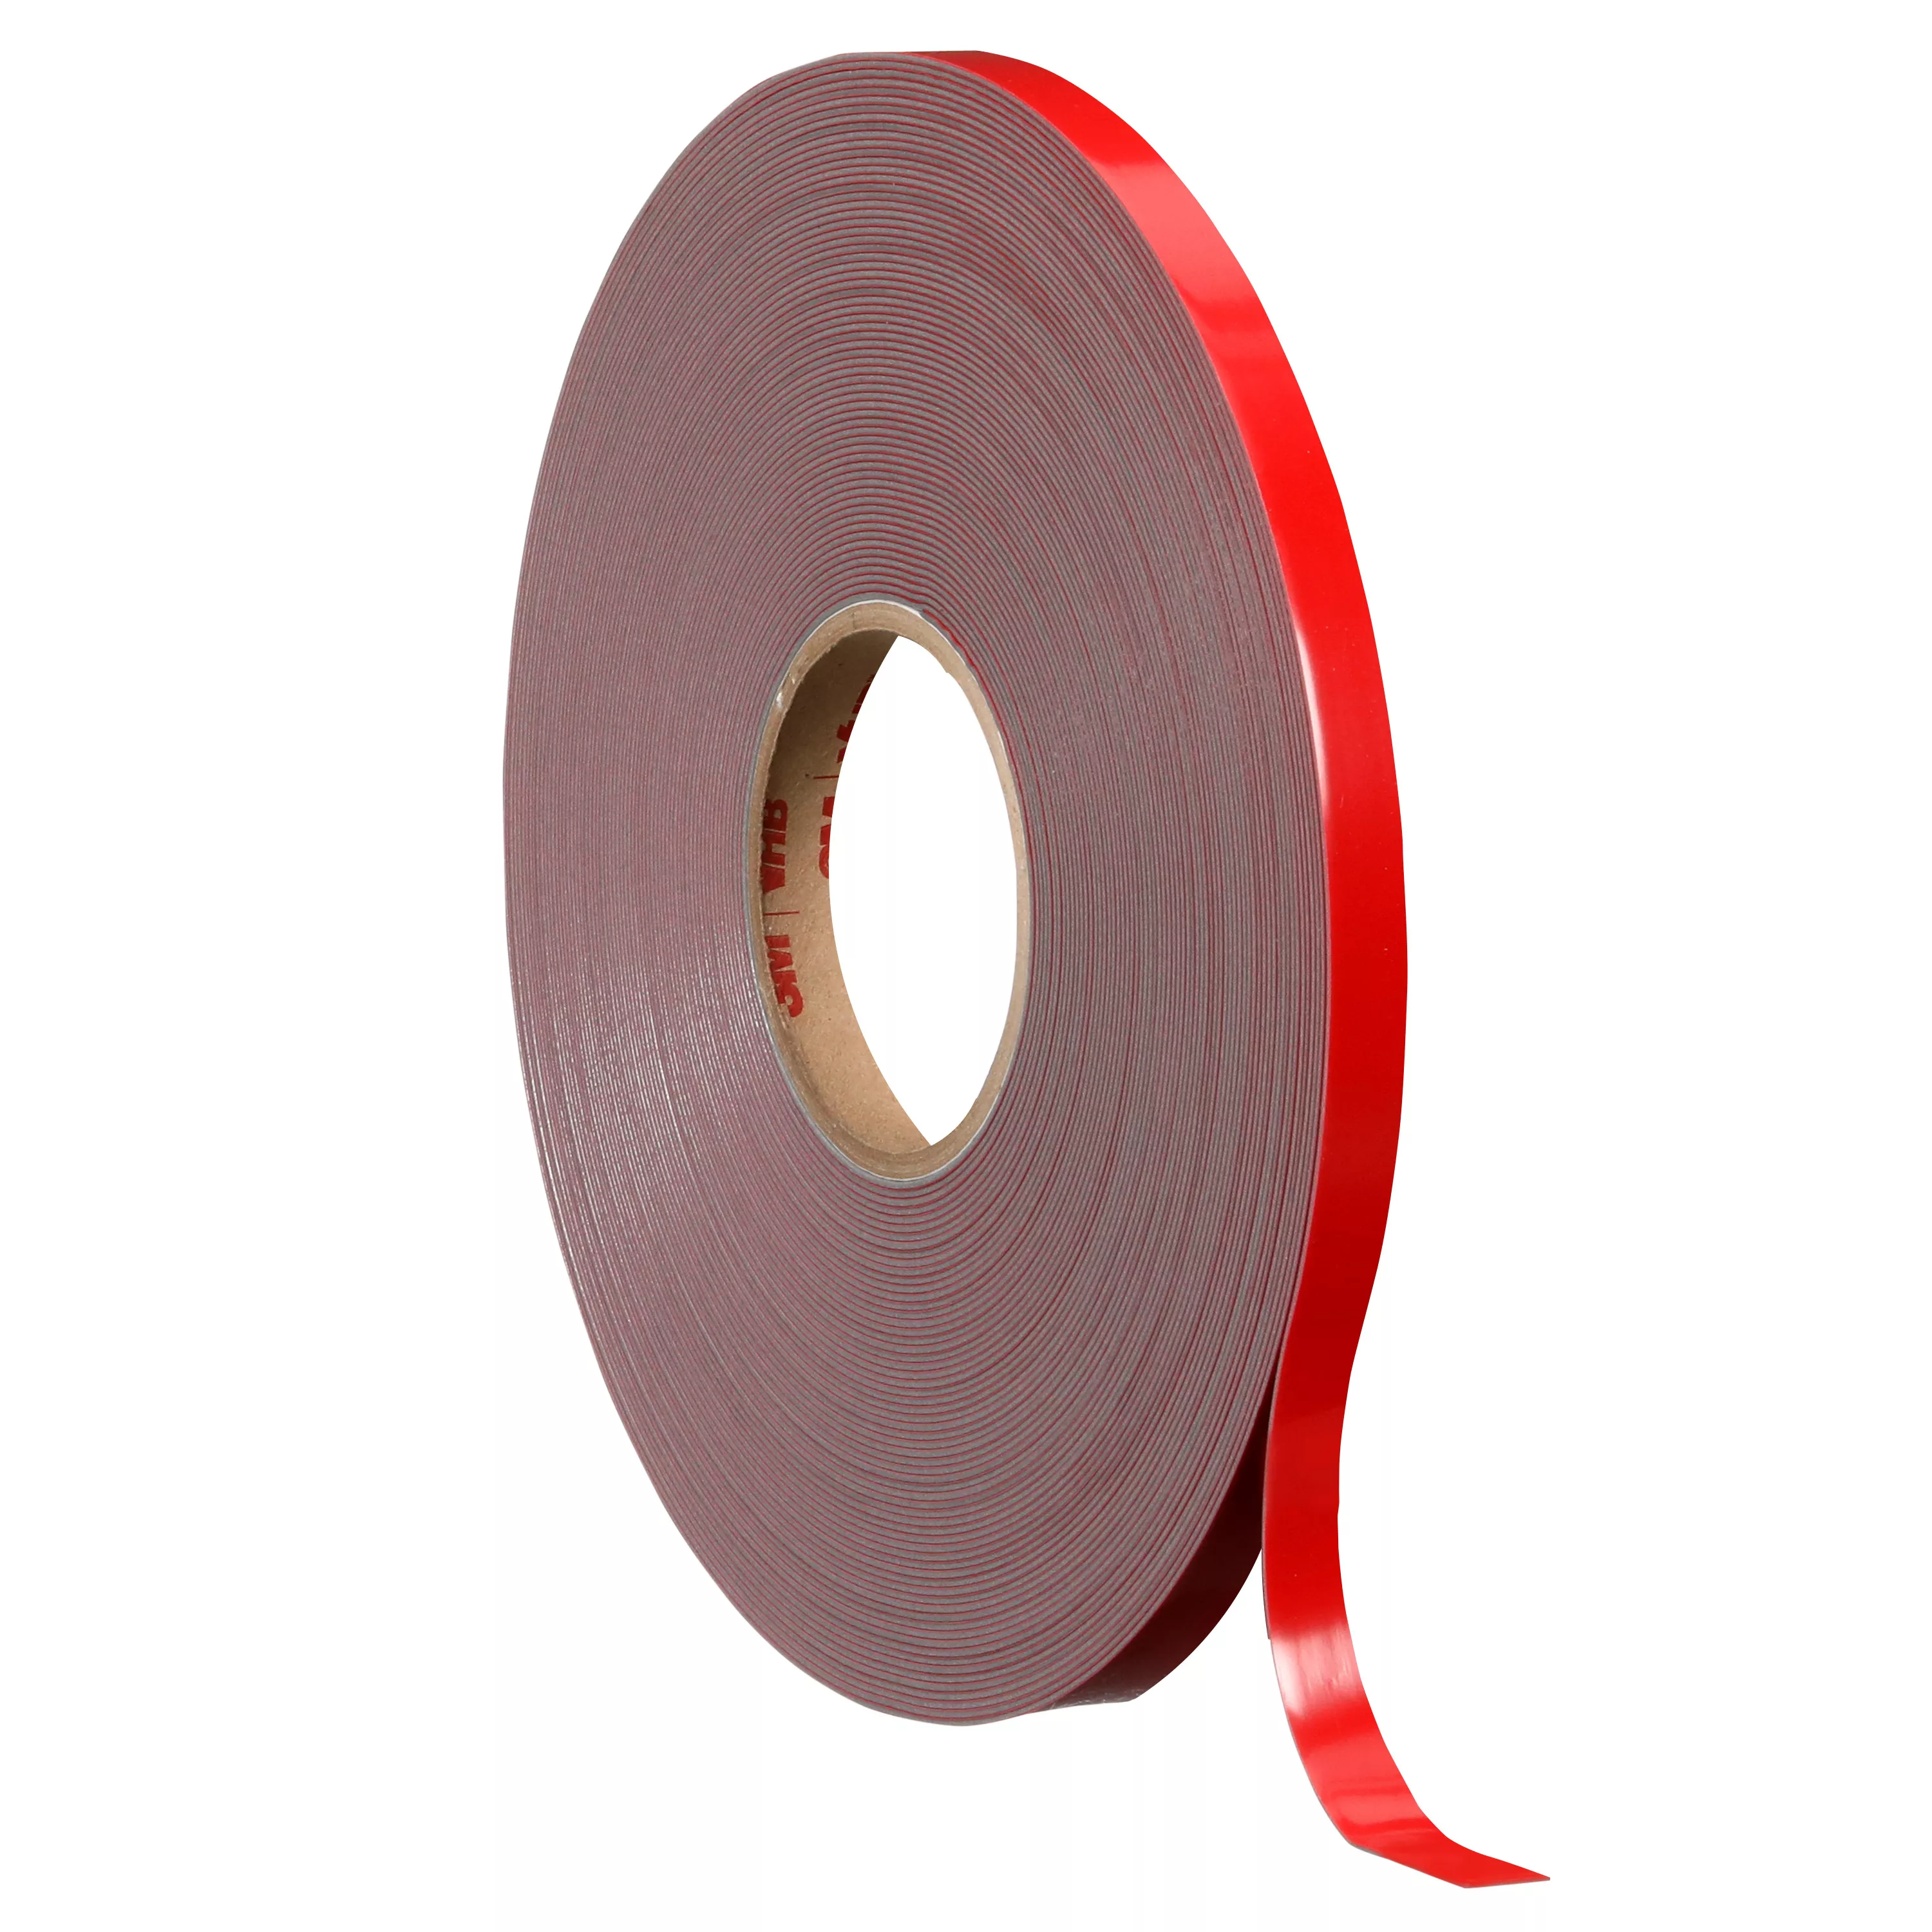 3M™ VHB™ Tape 4941F, Gray, 1/2 in x 36 yd, 45 mil, Film Liner, Small
Pack, 4 Roll/Case